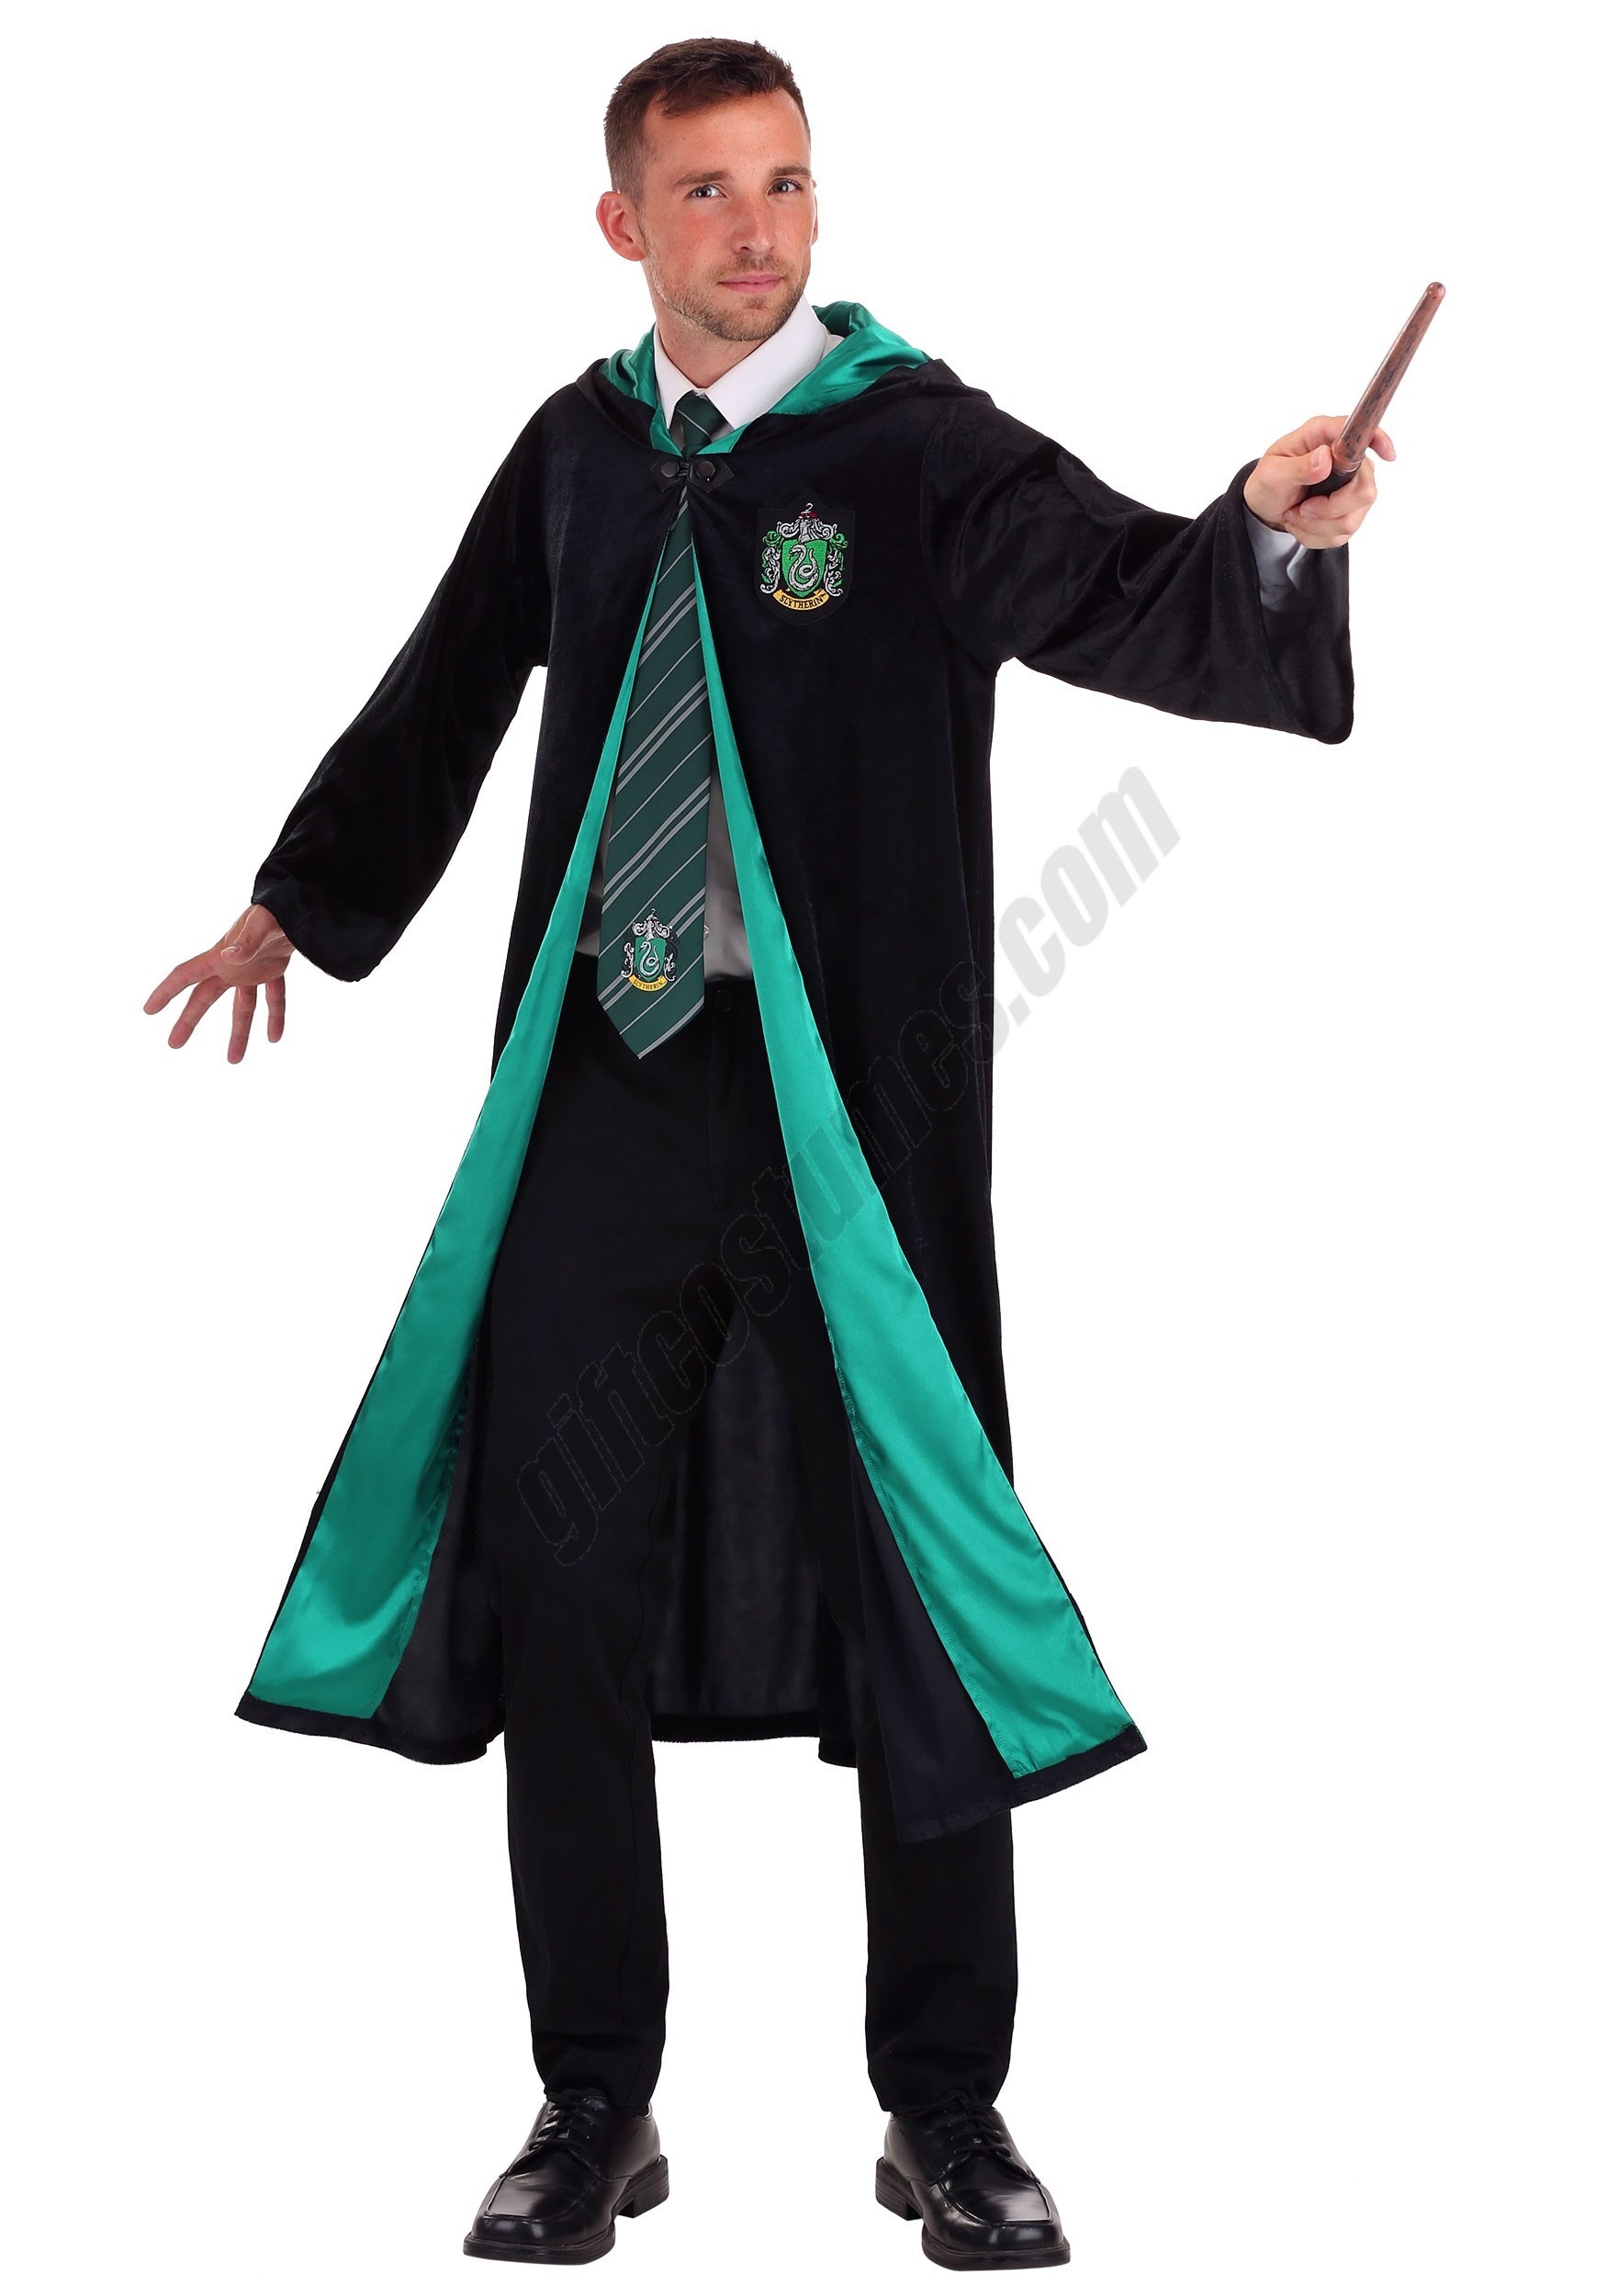 Harry Potter Deluxe Slytherin Robe Costume for Adults - Men's - Harry Potter Deluxe Slytherin Robe Costume for Adults - Men's